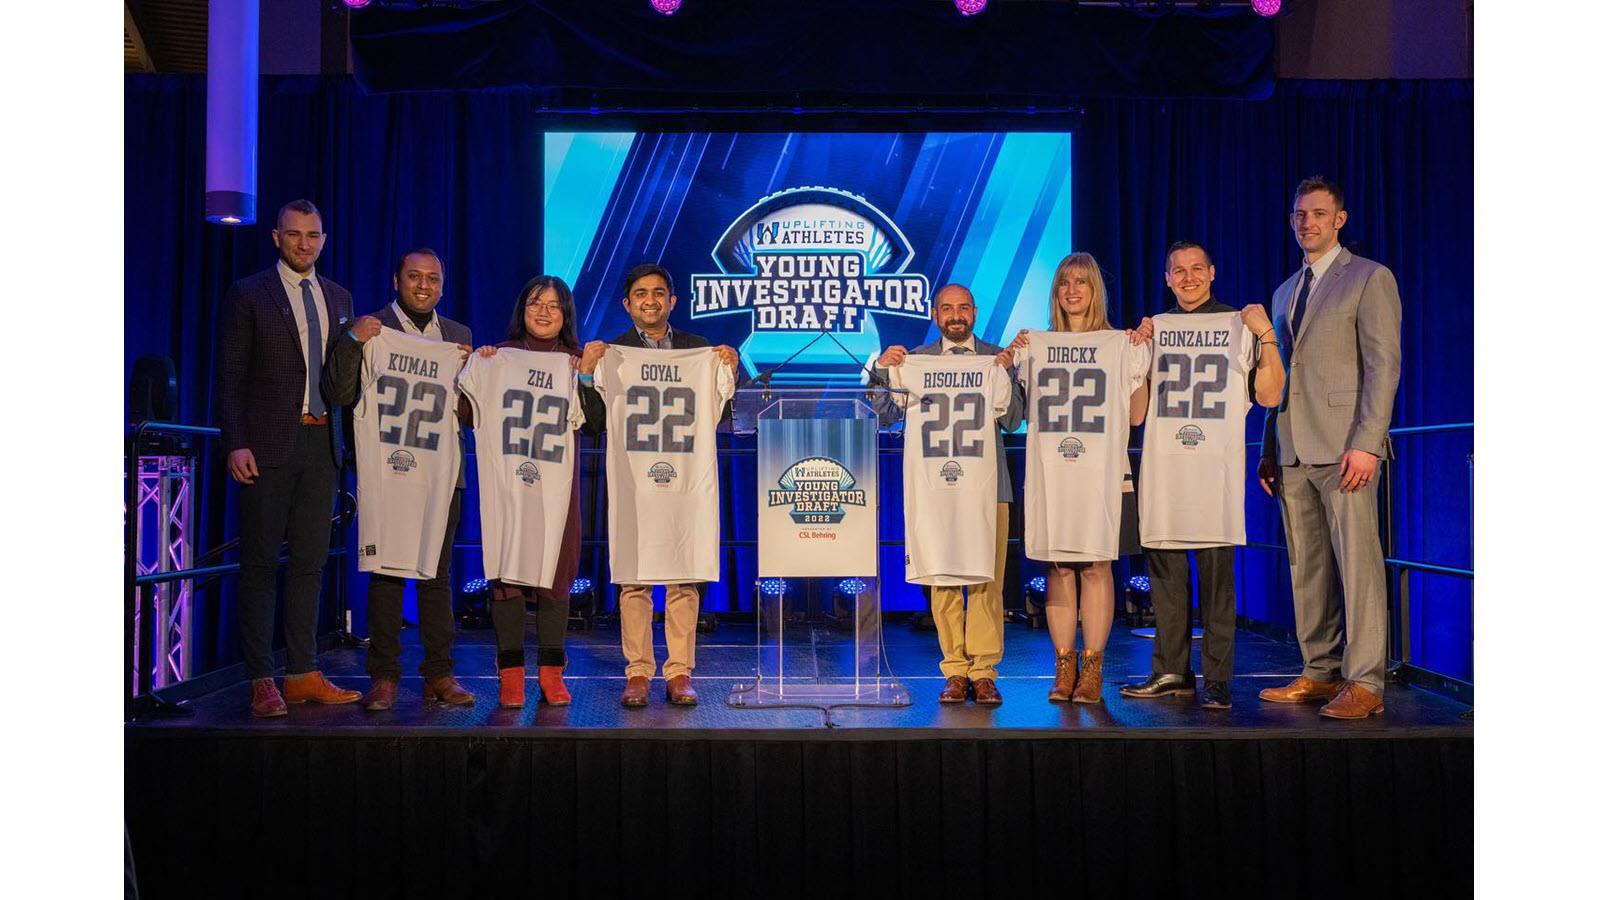 The winners of grants in the 2022 Uplifting Athletes Young Investigator Draft presented by CSL Behring